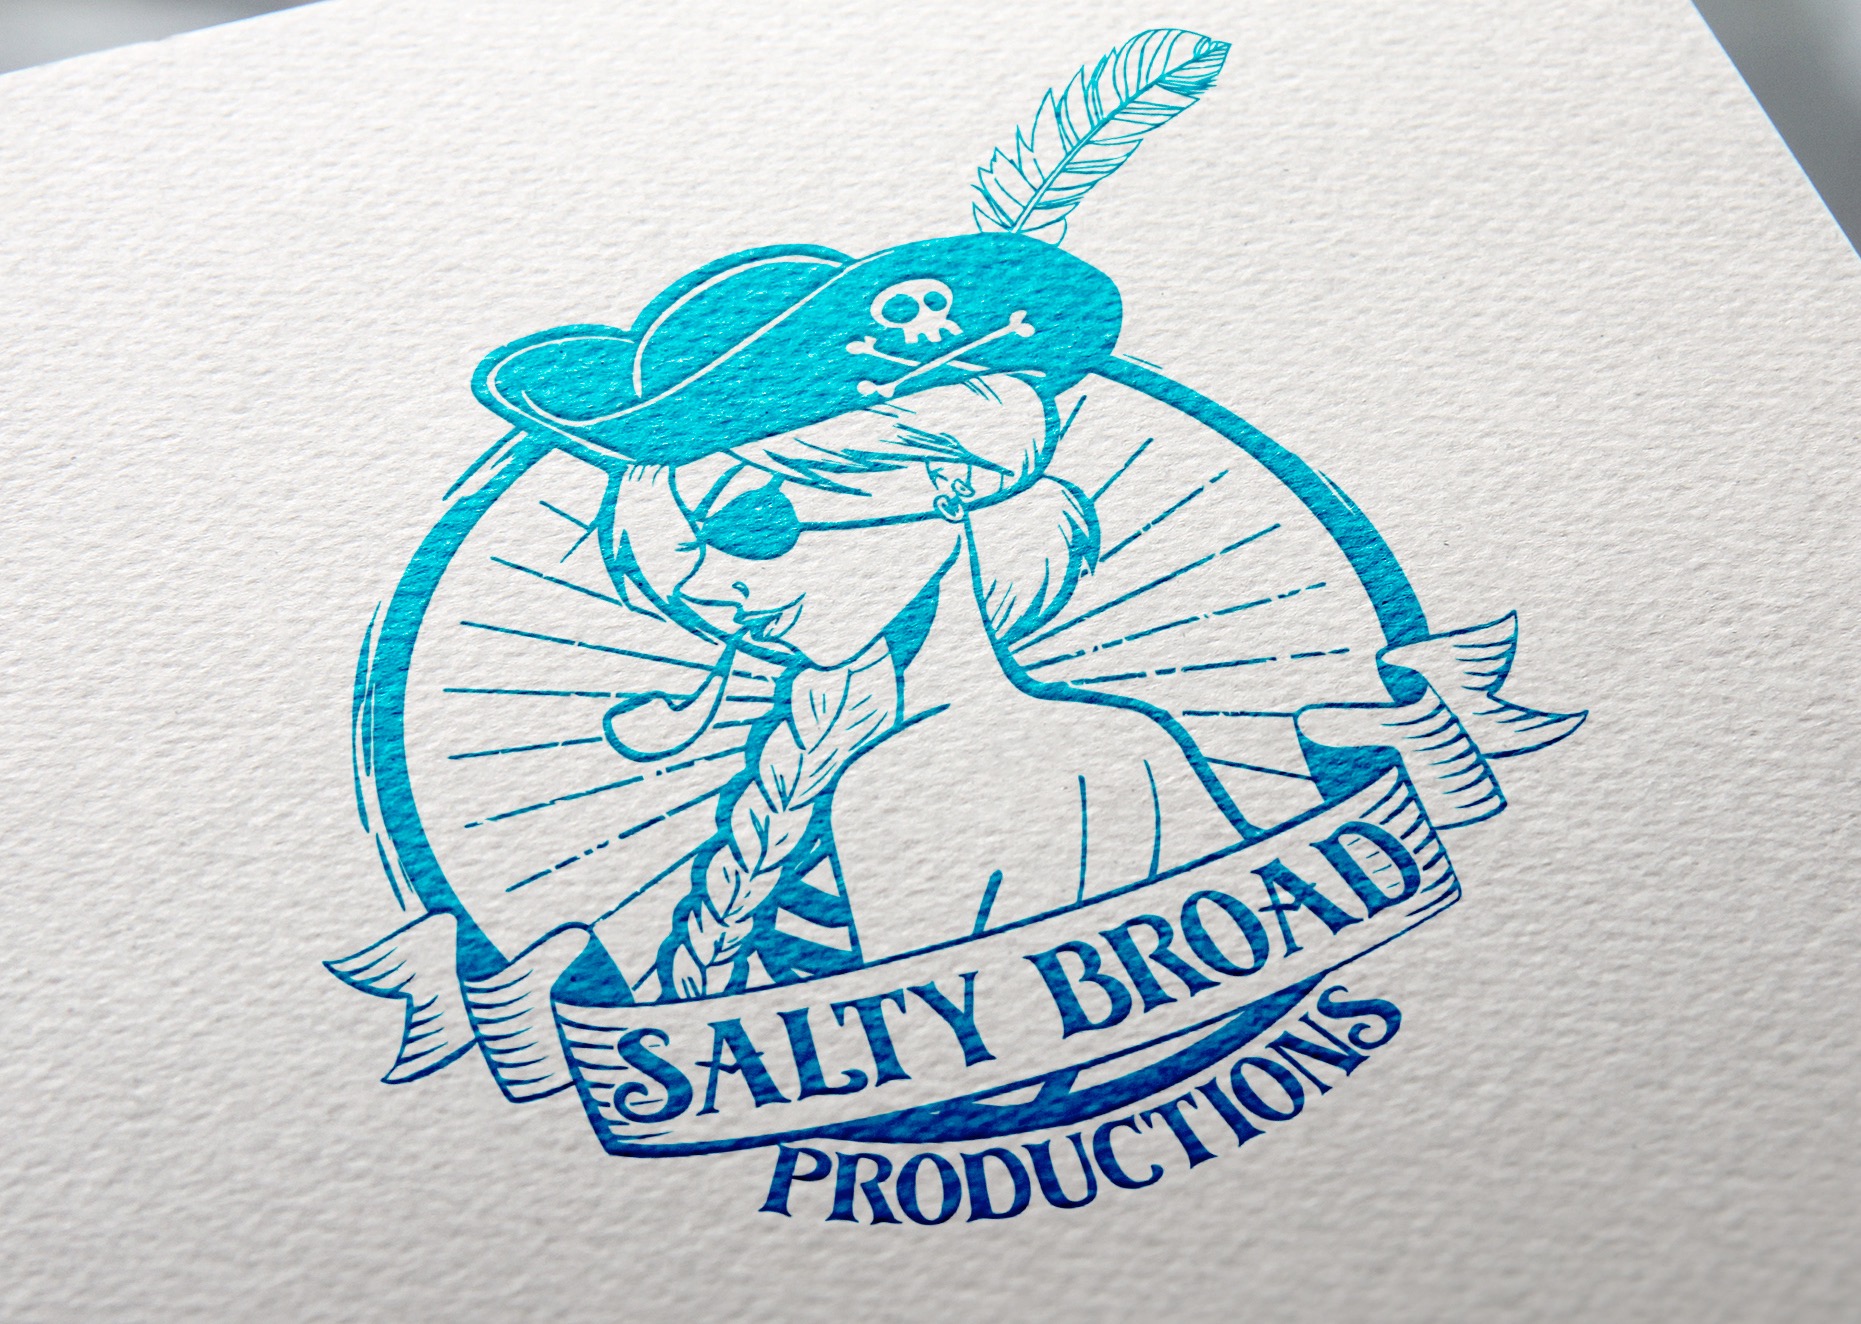 Logo Design: Salty Broad Productions